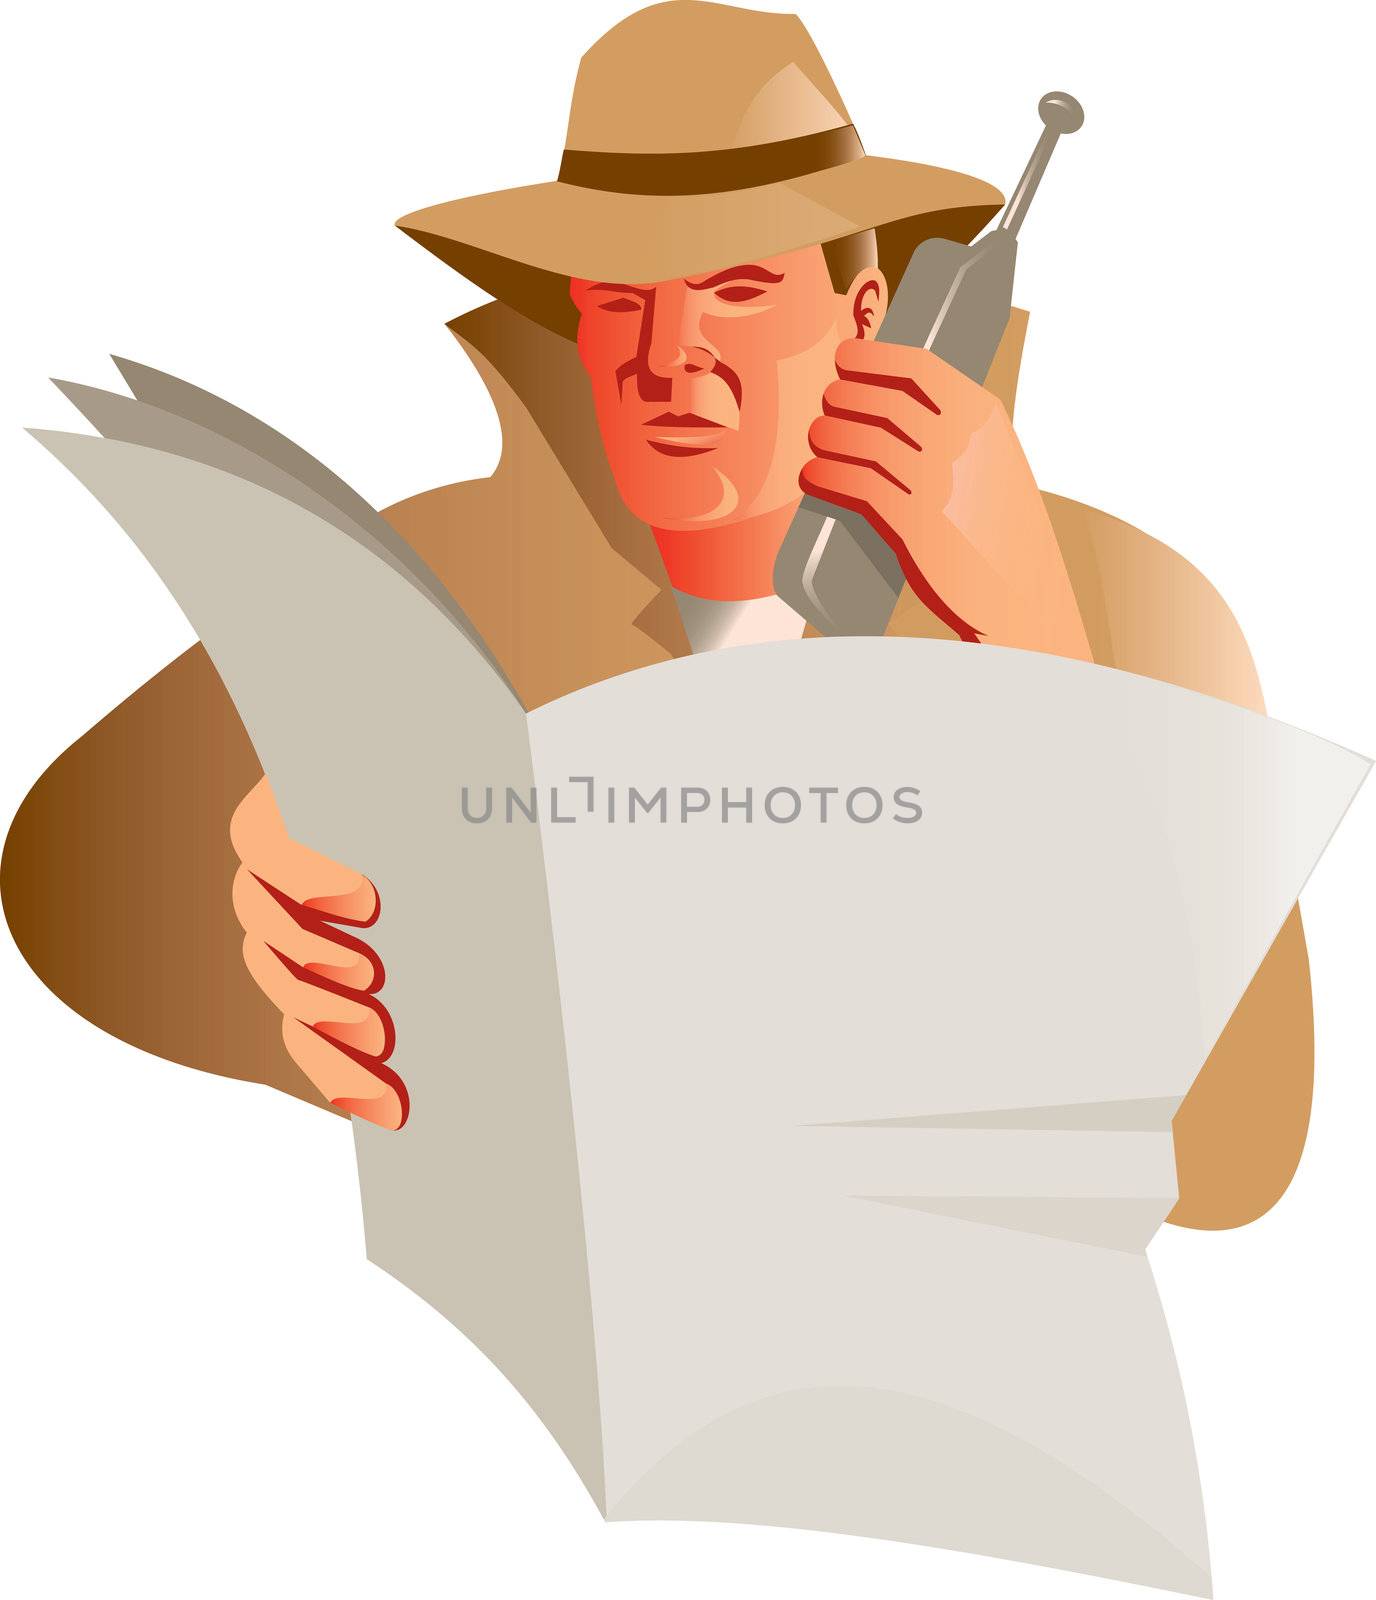 illustration of a male detective using calling cell phone while reading a newspaper on isolated background done in retro style